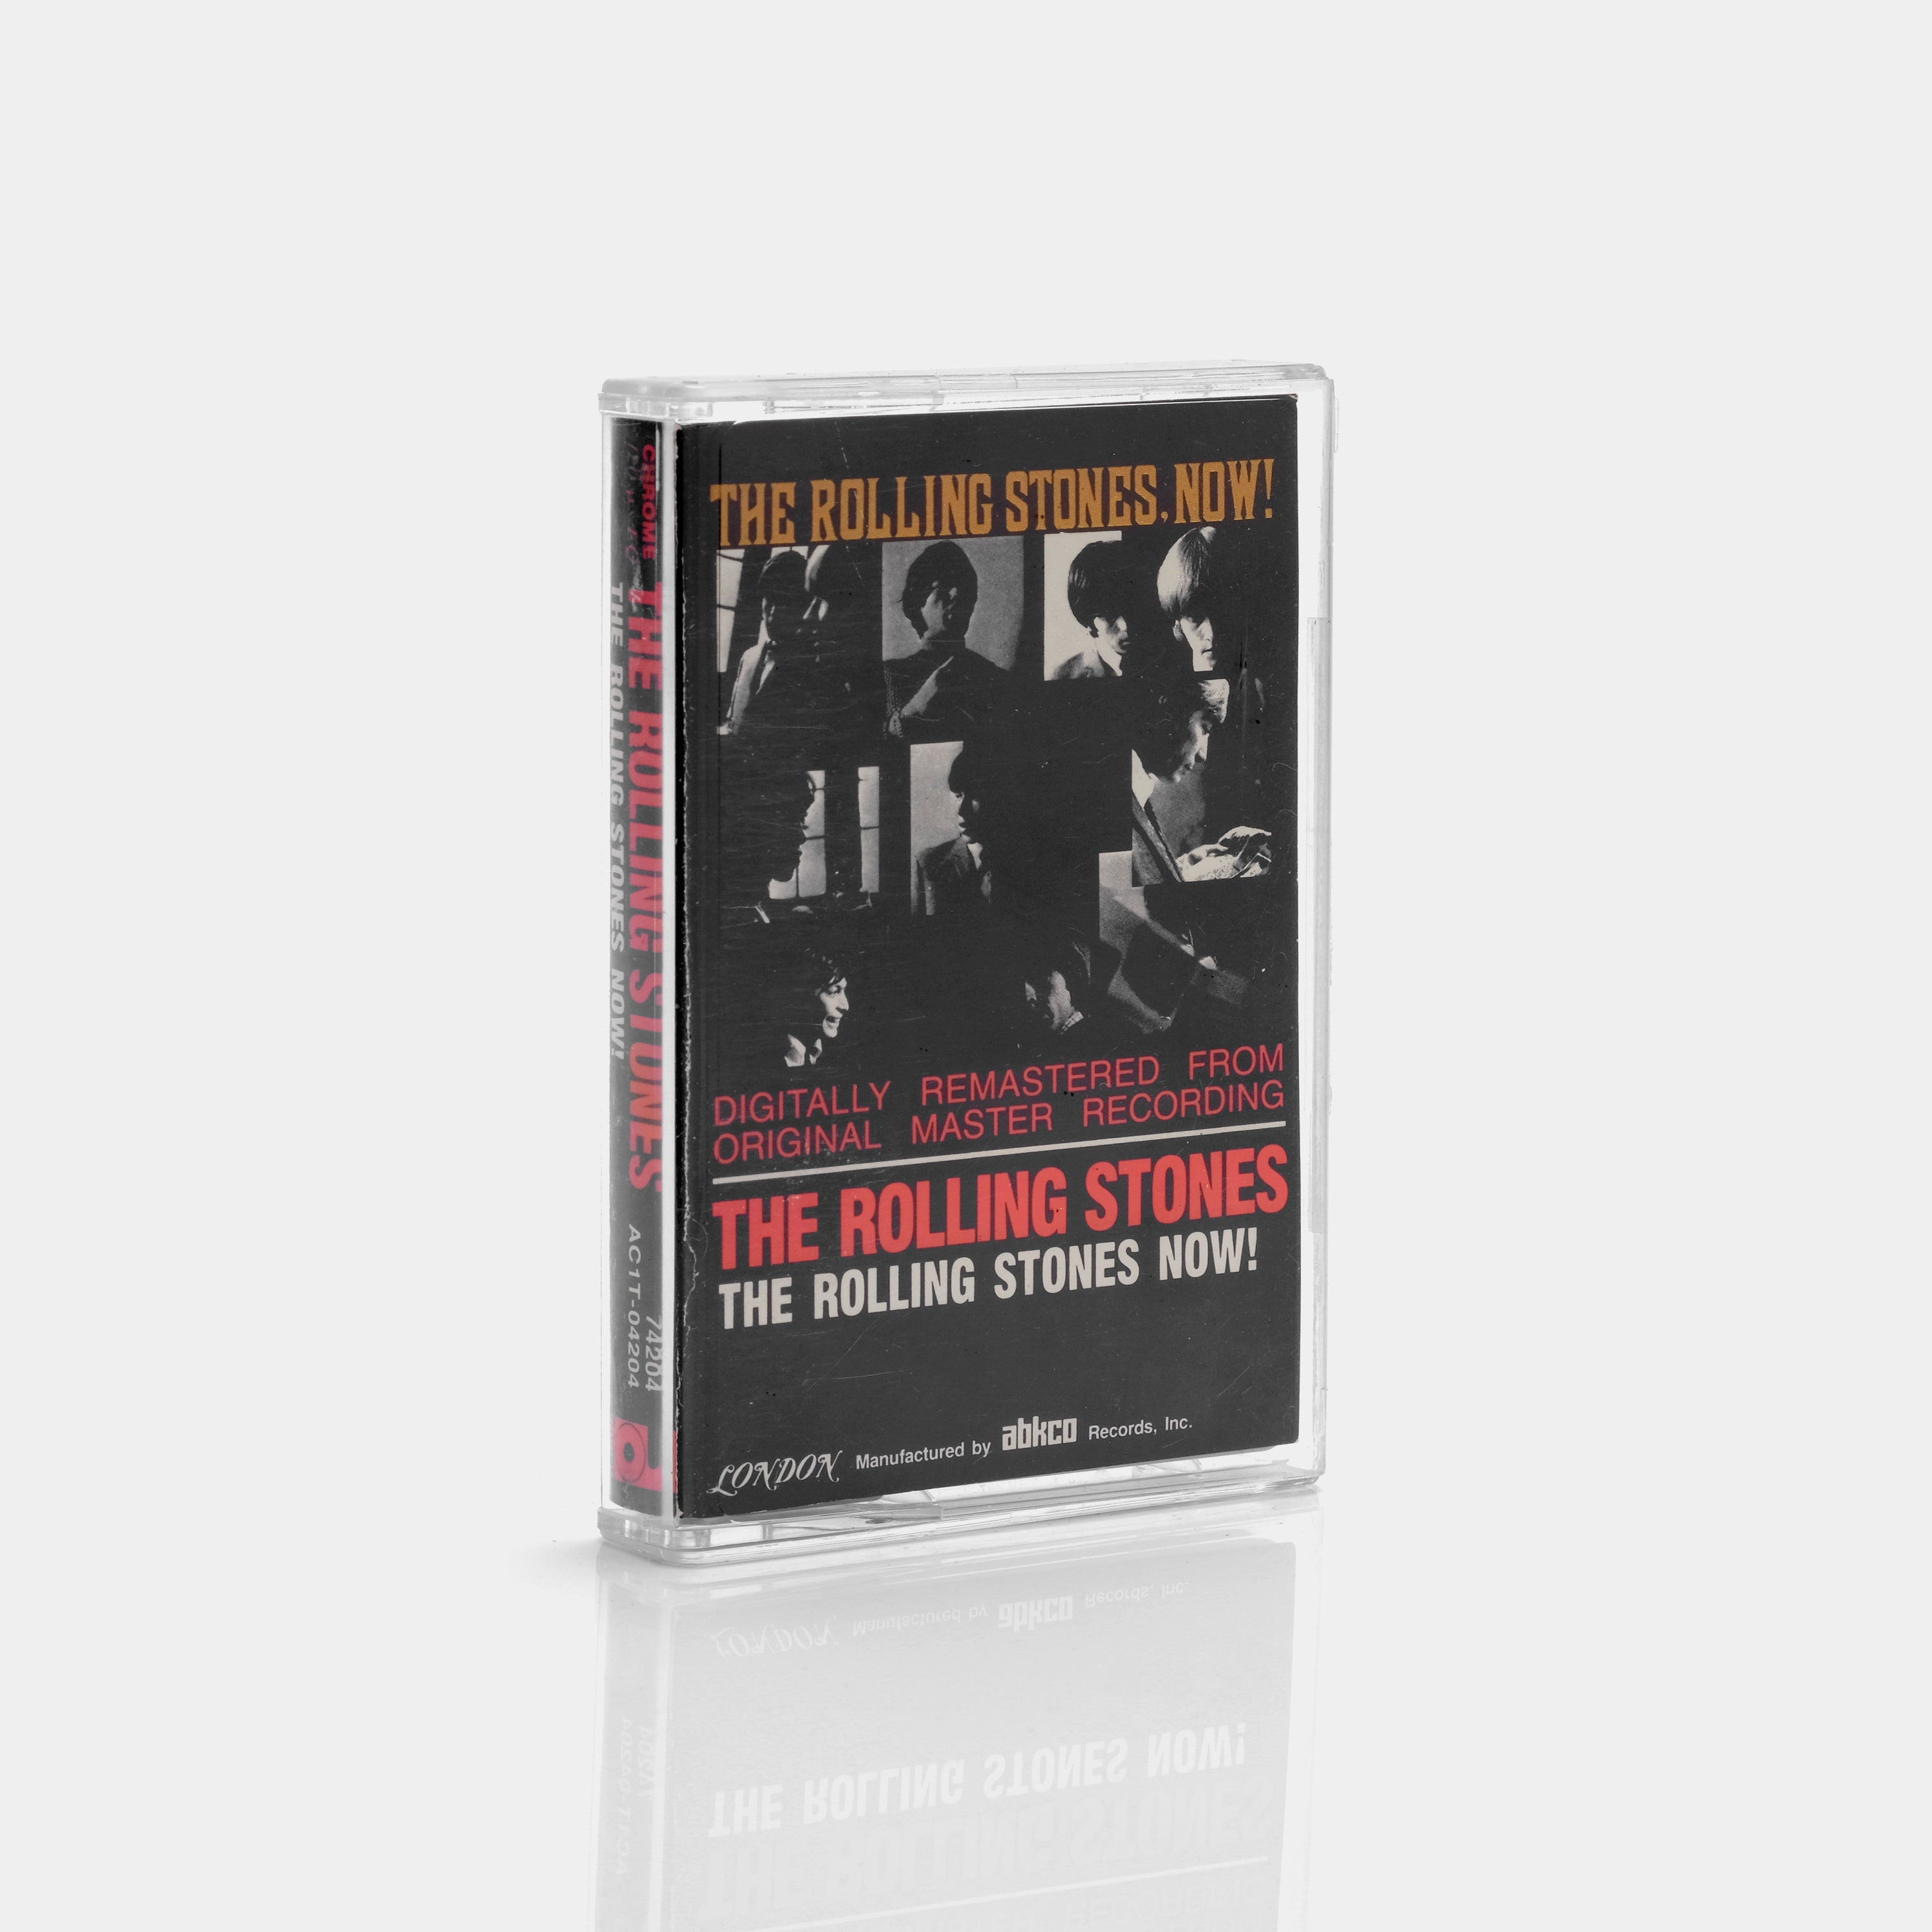 The Rolling Stones - The Rolling Stones, Now! Cassette Tape